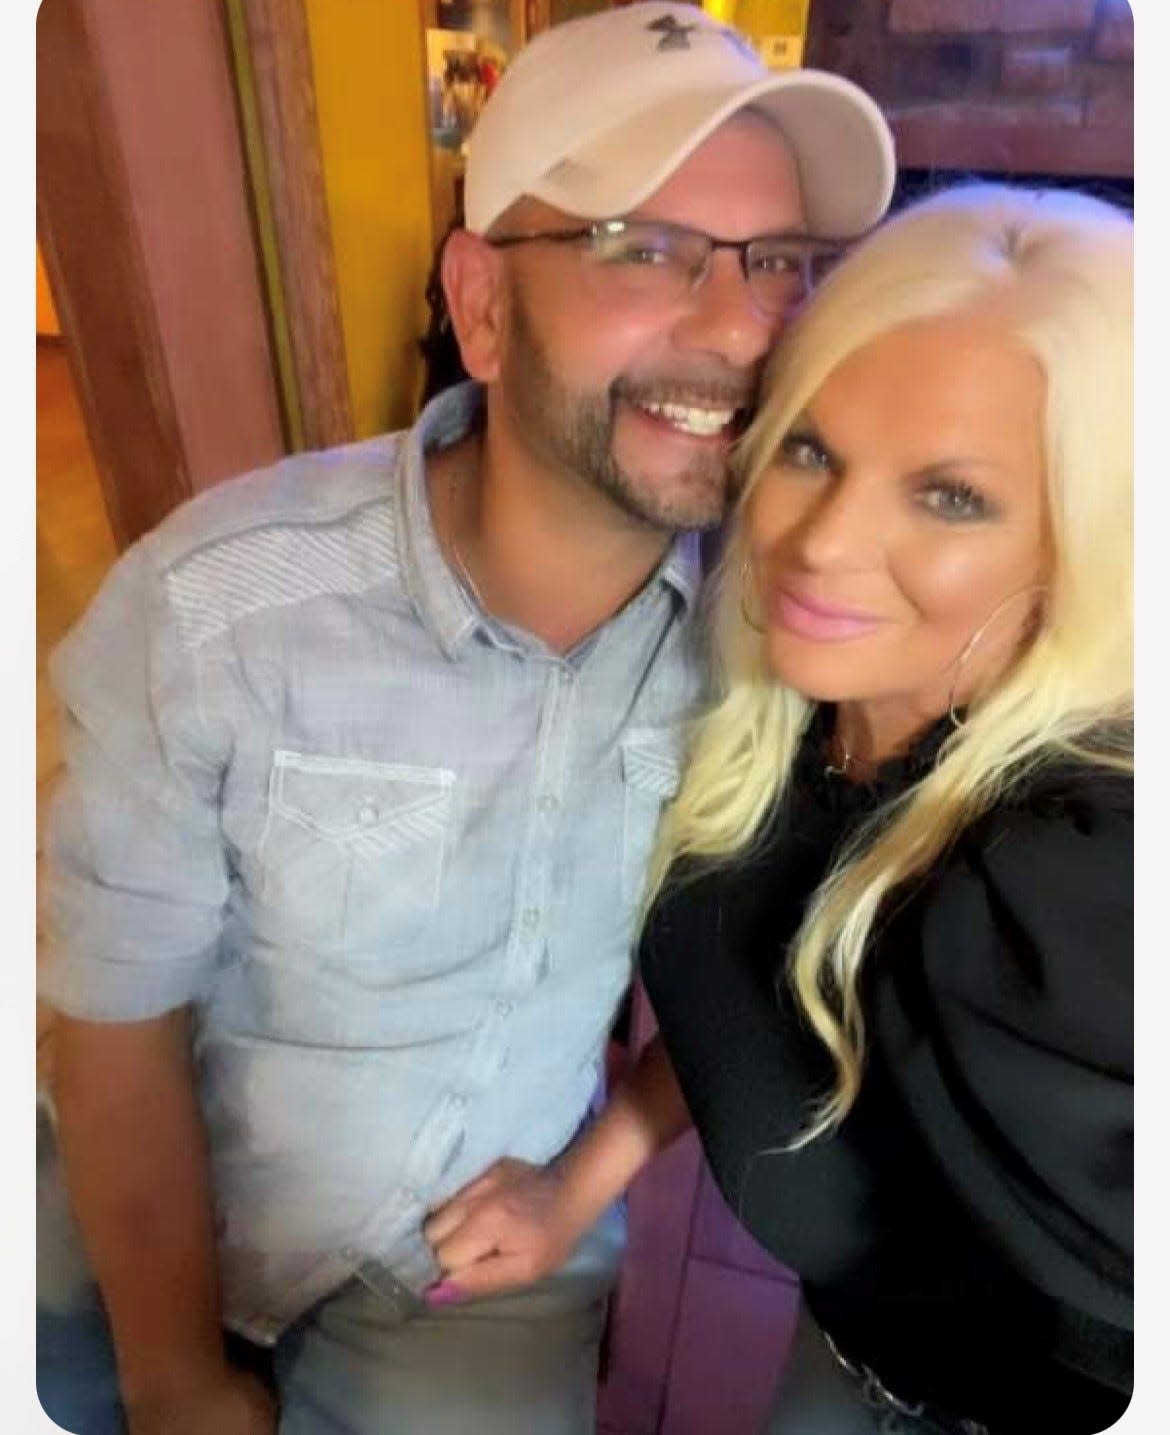 Trish Wharff-Israel of Newcomerstown is realizing her dream of operating a business catering to all things beauty. She has opened Glam & Tan Beauty in Coshocton with the support of her husband, Dave Israel.